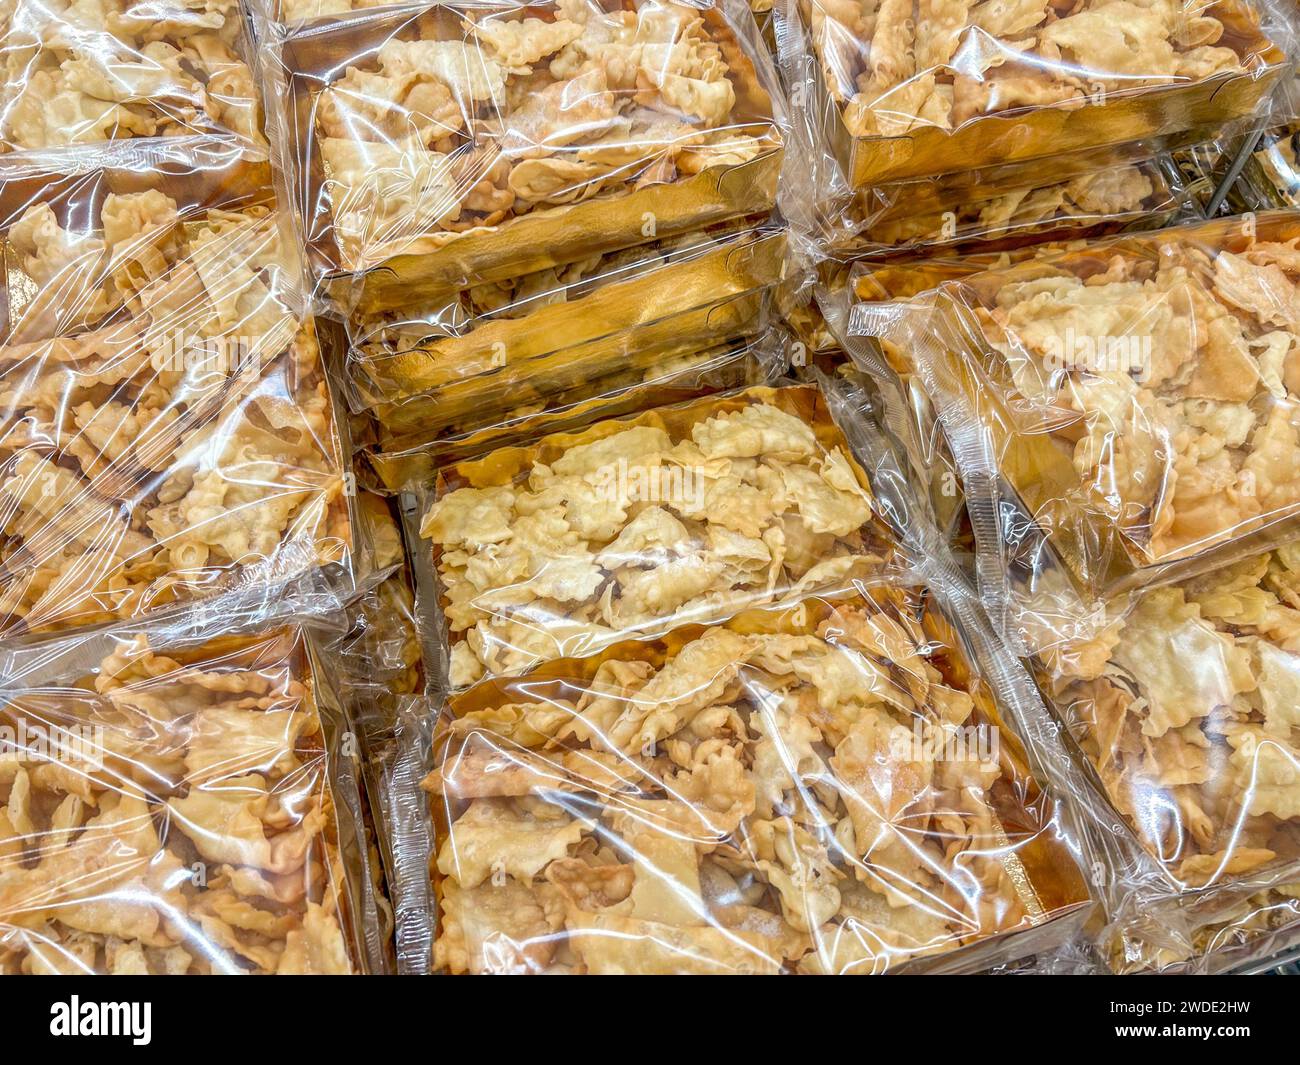 Bugie (Lies) or frappe or chiacchere or angel wings. Traditional italian carnival dessert in golden packages displayed for sale in market Stock Photo